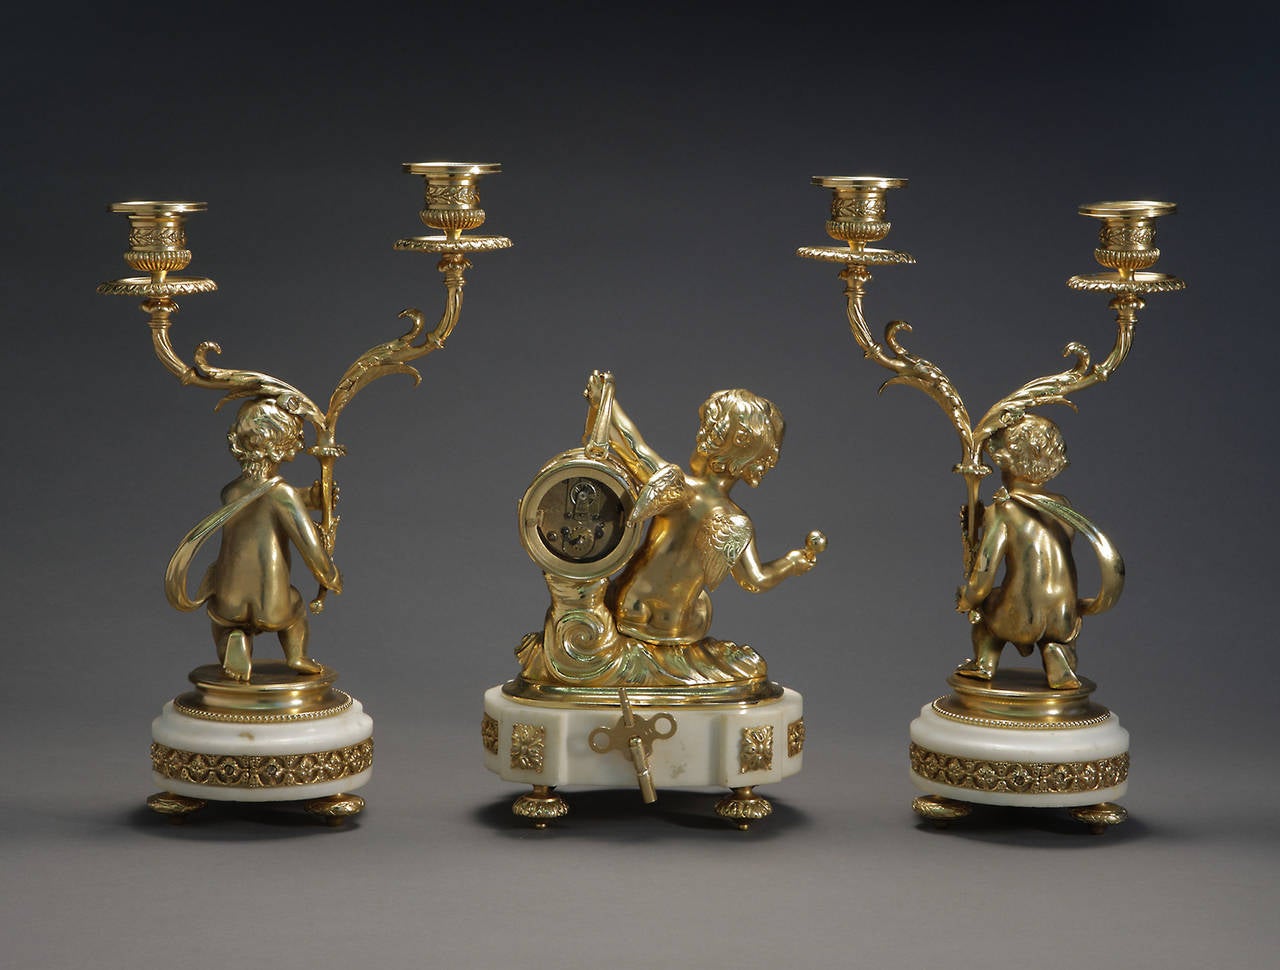 A French Louis XVI Style Ormolu Bronze Clock Garniture

Having an enamel dial with arabic numbers accompanied by two candelabras with cherubs on white marble bases

France, Circa 1880

Dimensions: Clock: 9